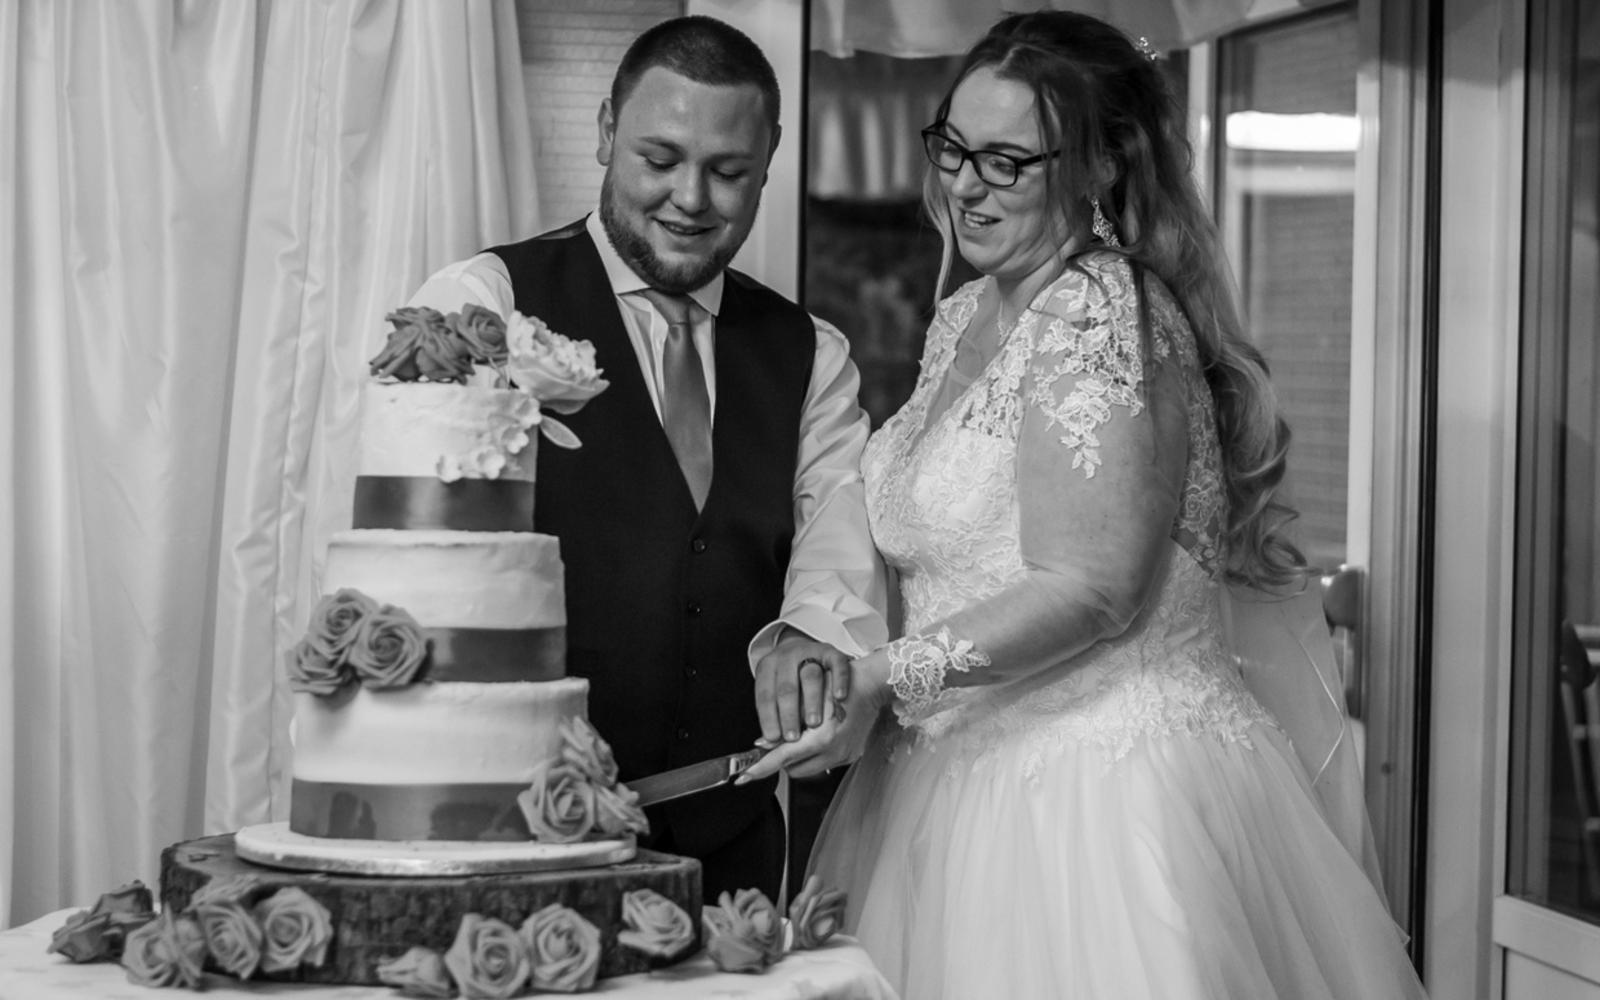 Real Wedding Whitewed Directory approved photographer Strike A Pose Photography Grasmere House Hotel Salisbury bride groom cutting cake